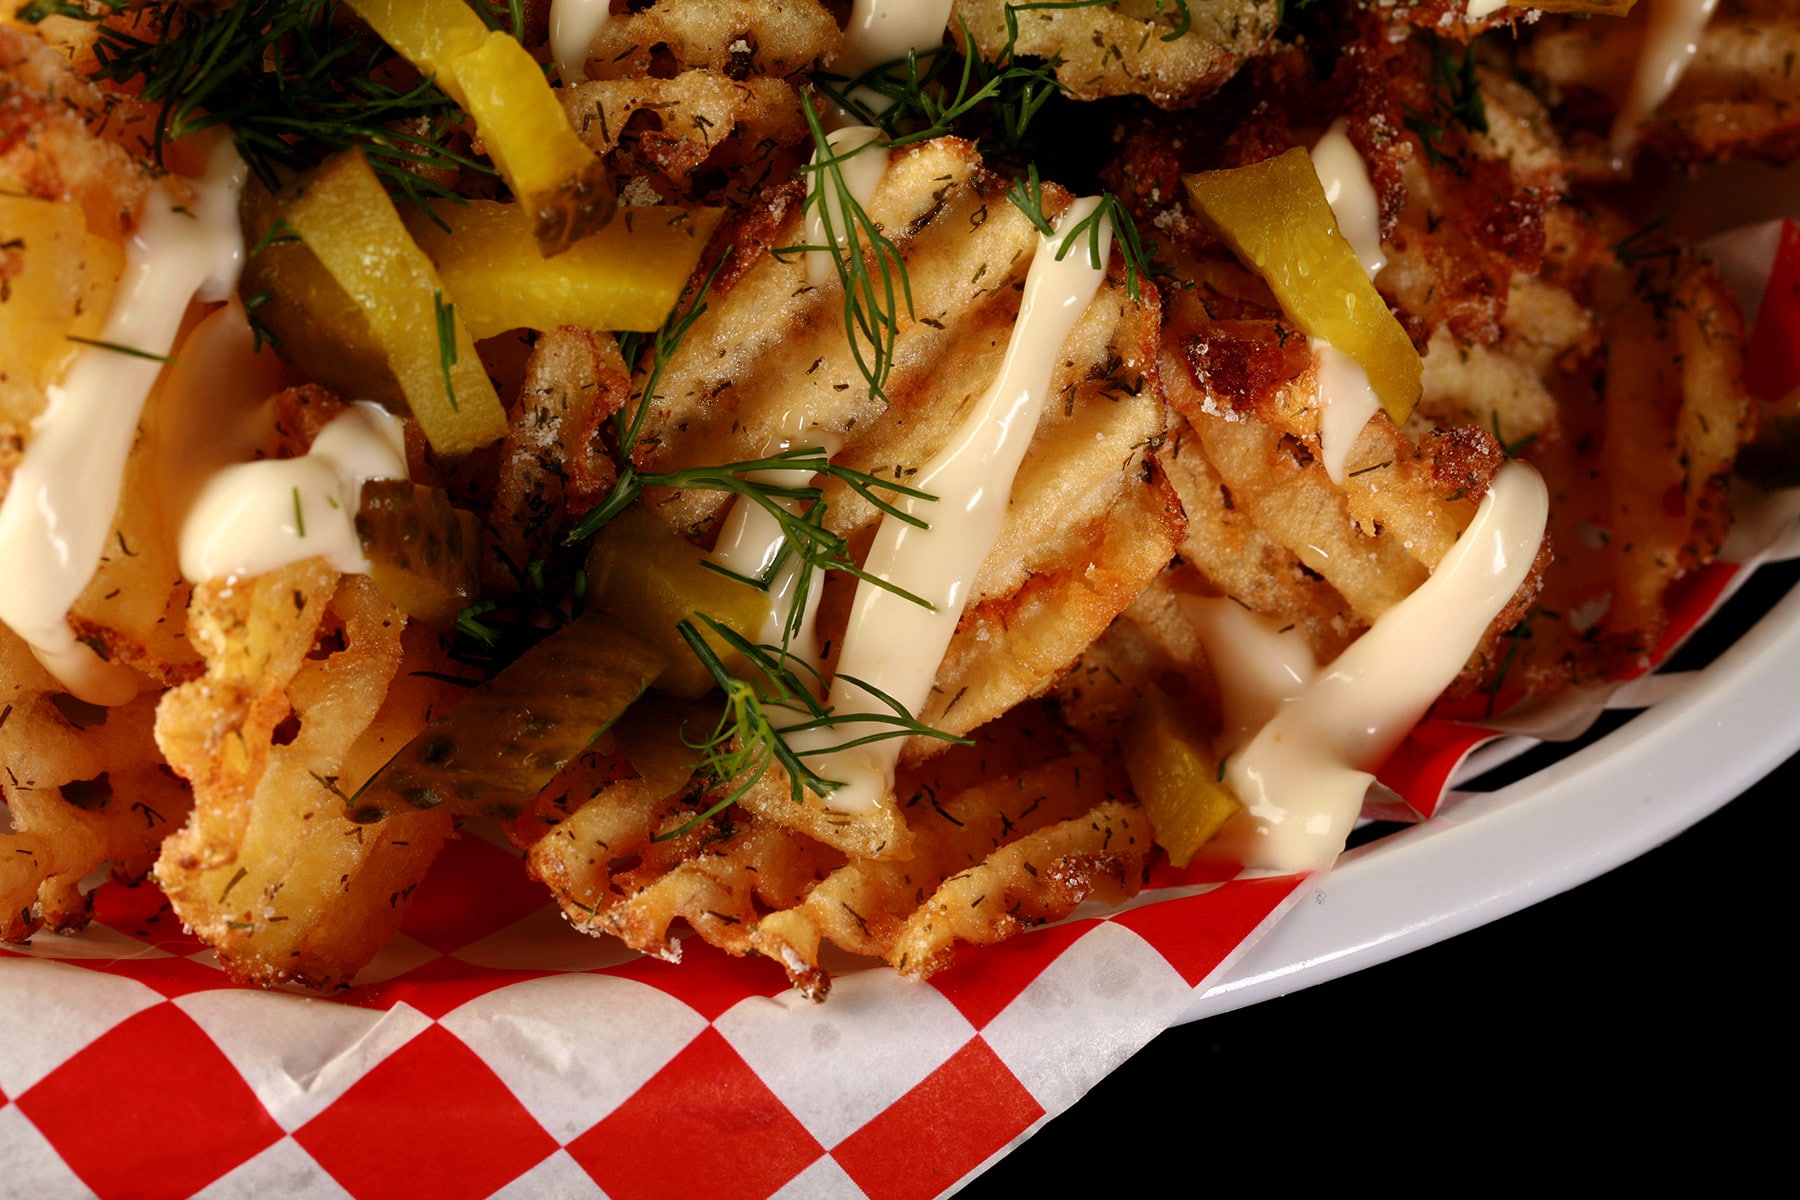 Waffle cut fries, in a white basket lined with red and white checkered paper. The fries are drizzled with roasted garlic aioi and topped with chopped dill and chopped pickles.